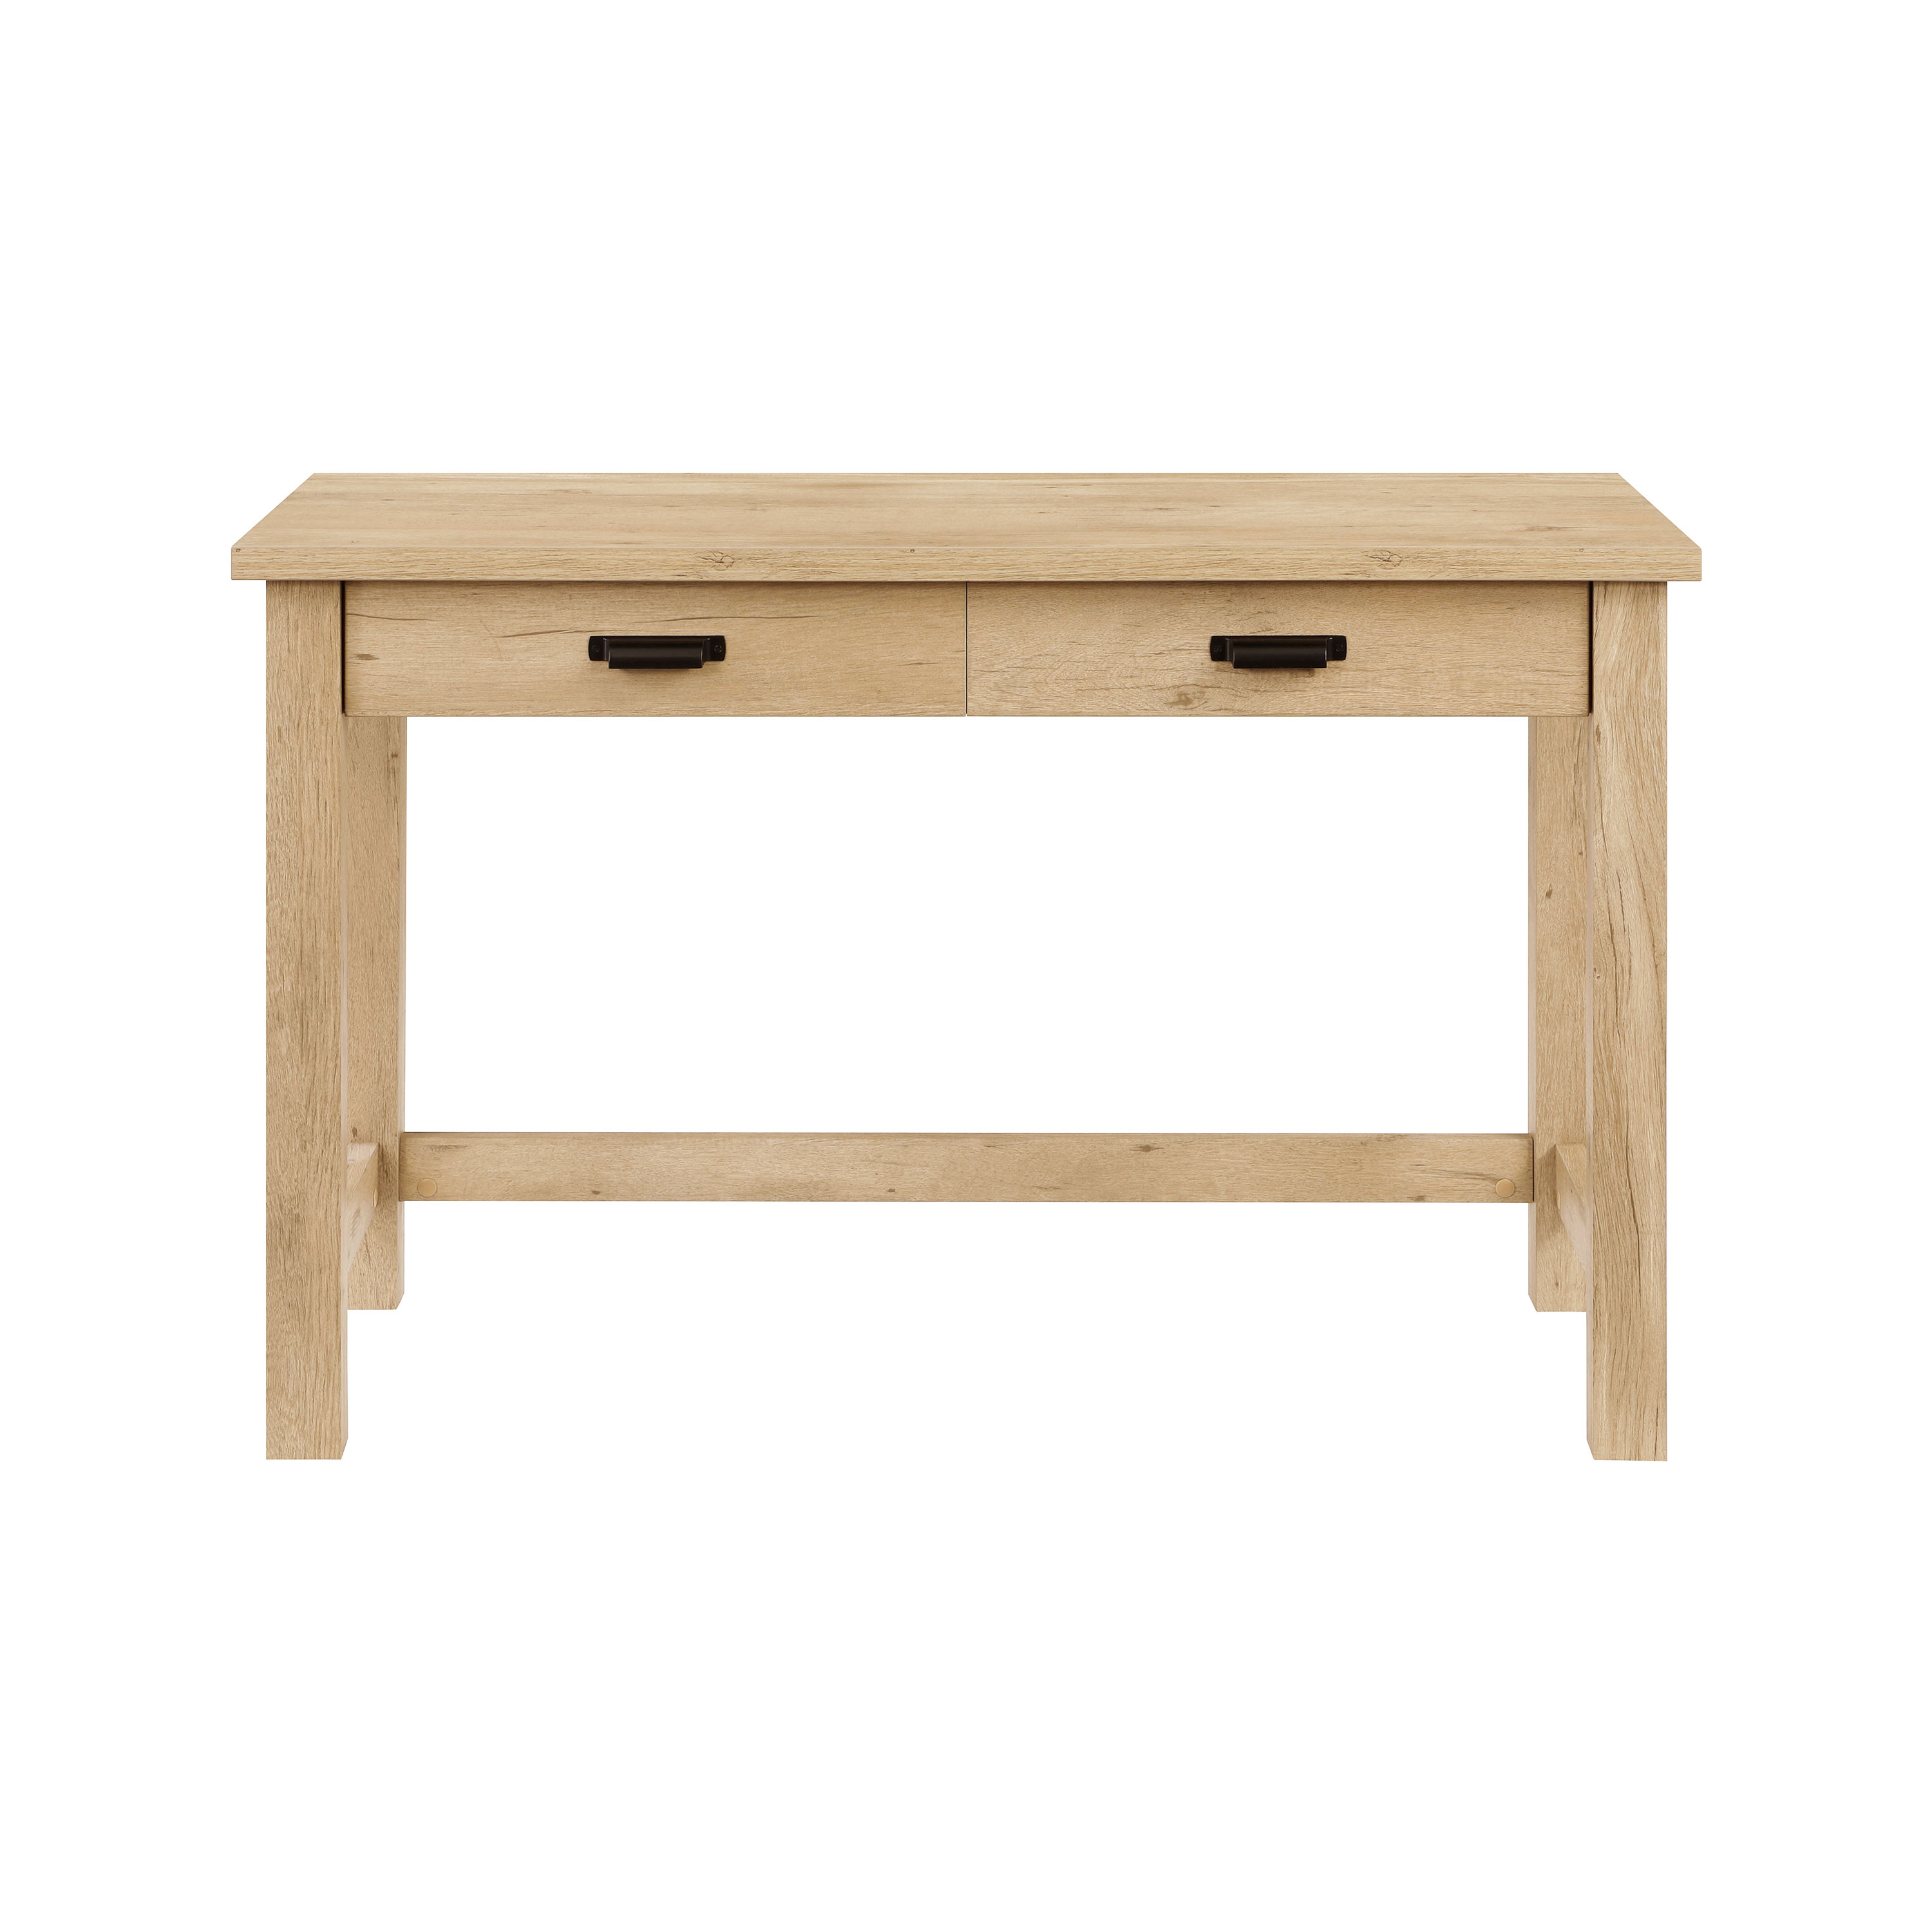 Better Homes & Gardens Wheaton Farmhouse 47" Writing Desk with Storage and Built-in Power Station, Natural Oak - image 1 of 9